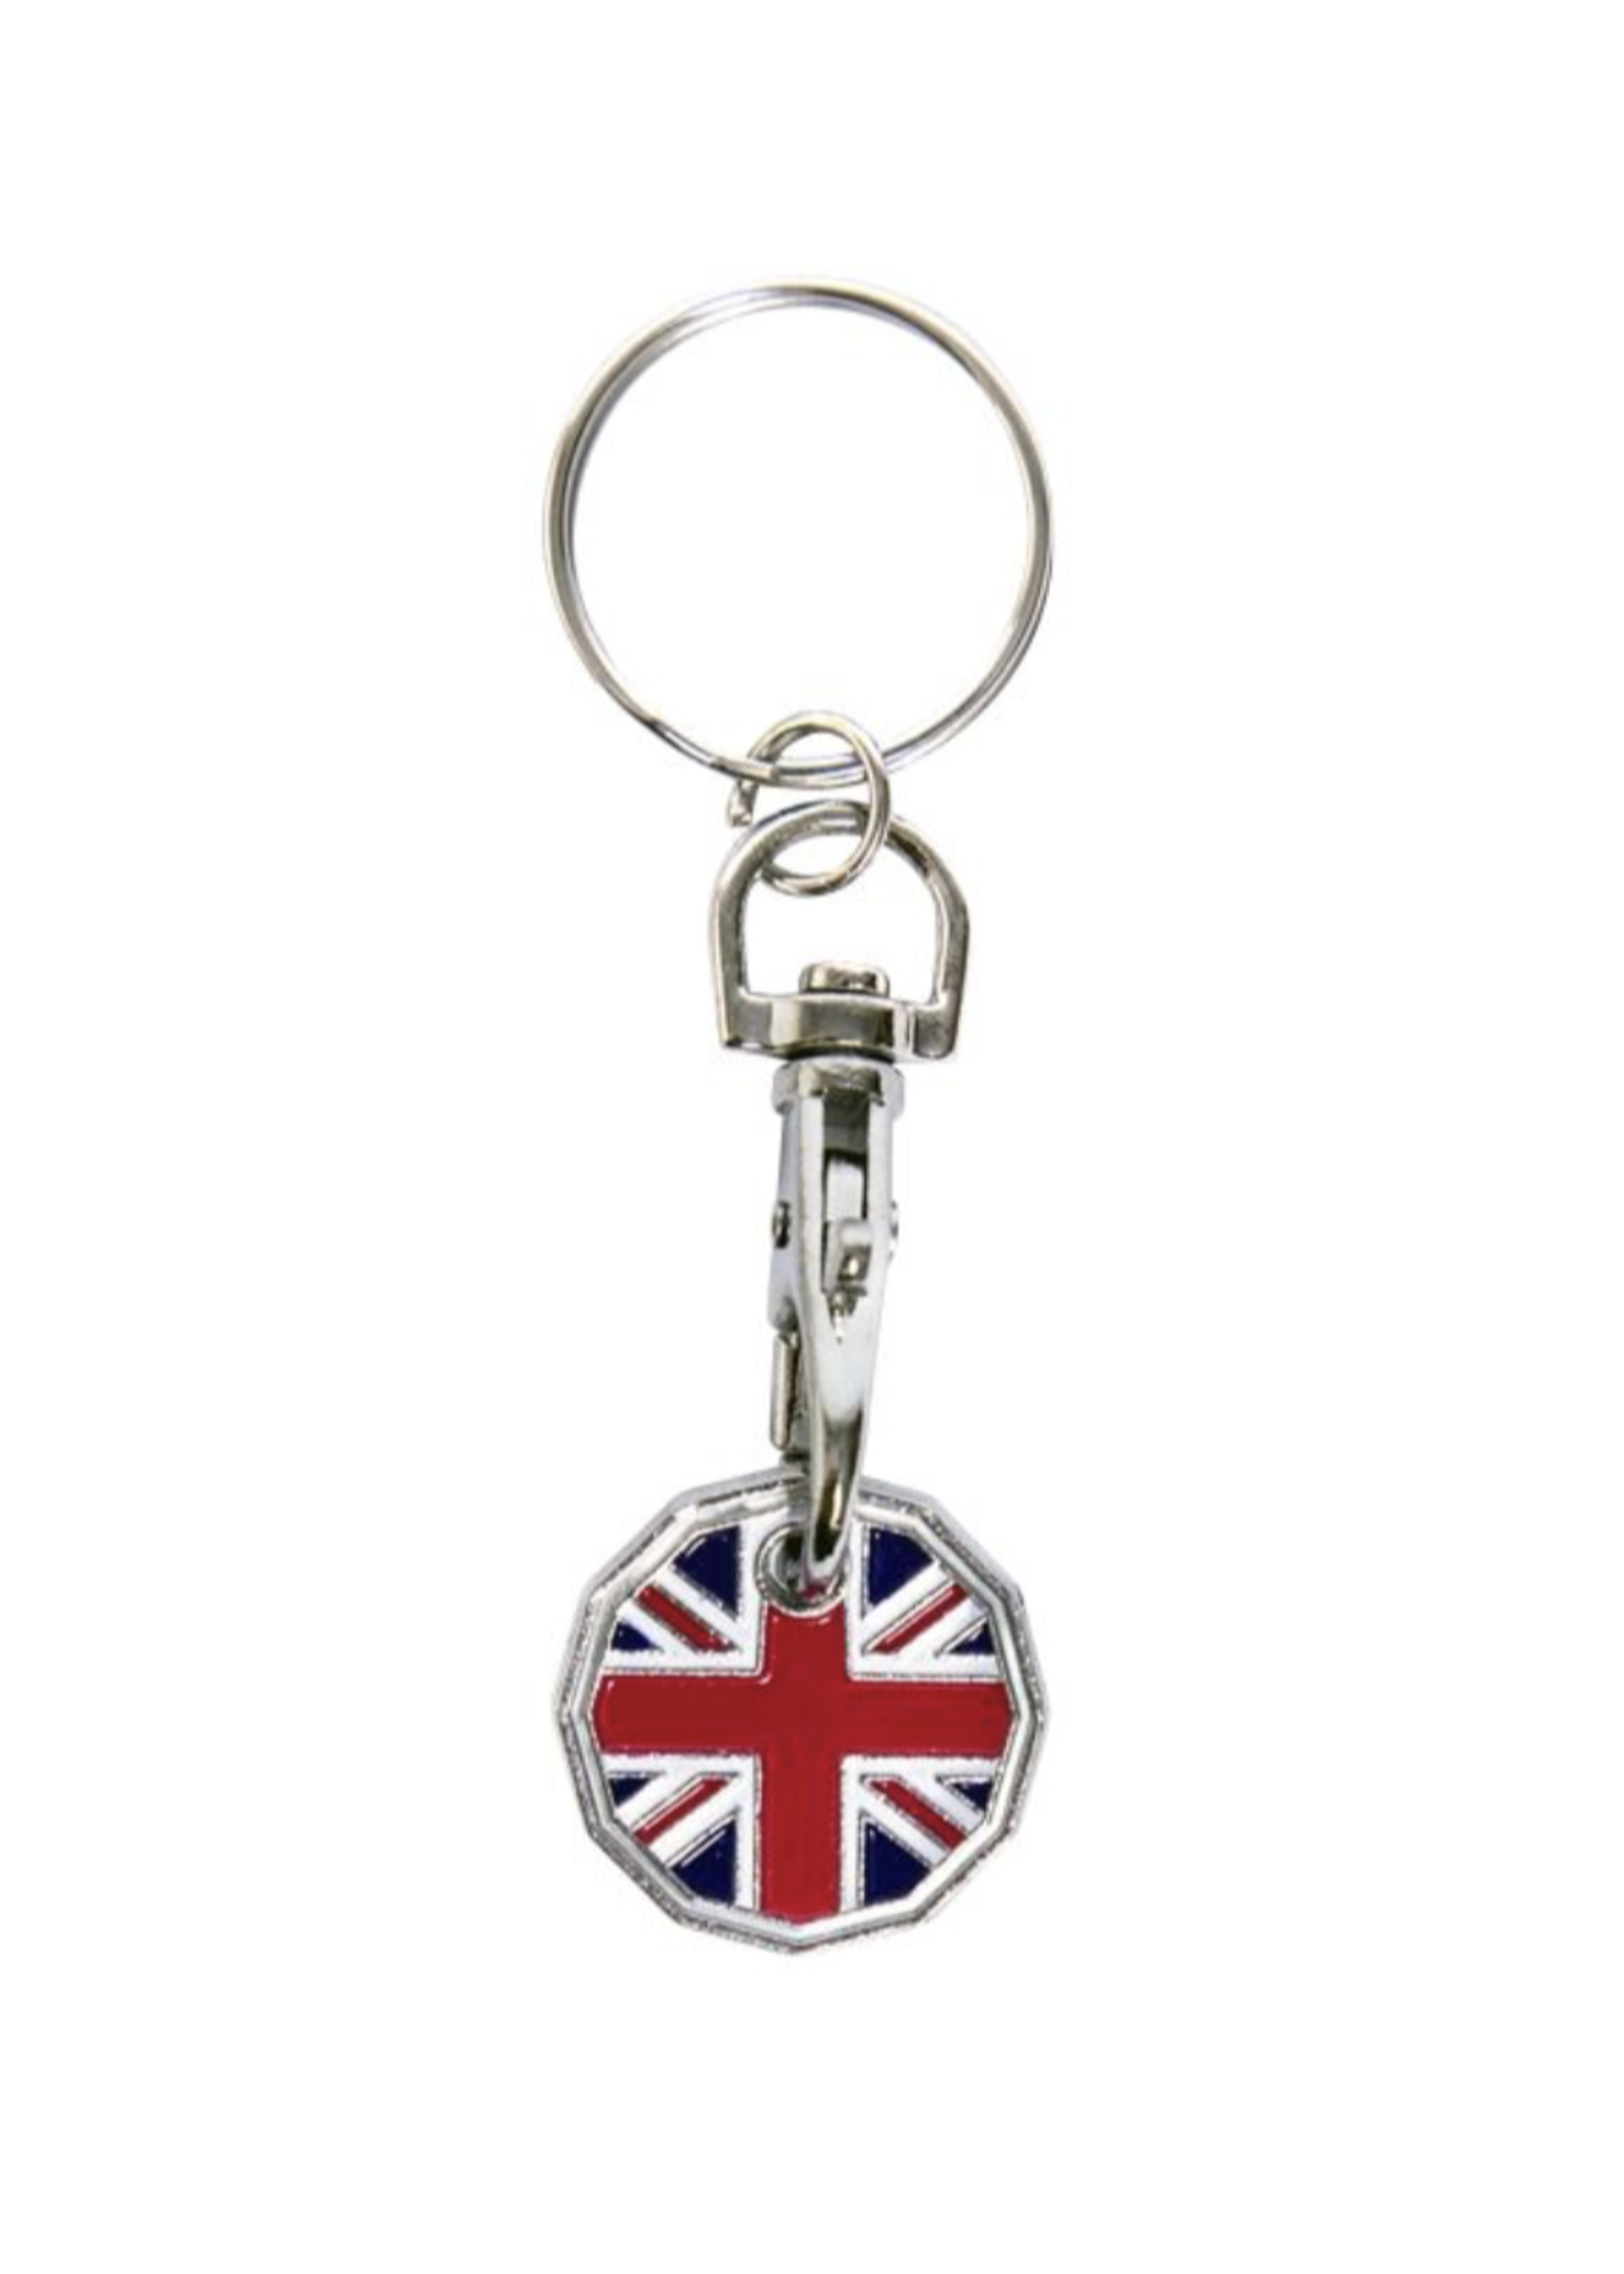 Union Jack Shopping Trolley Coins